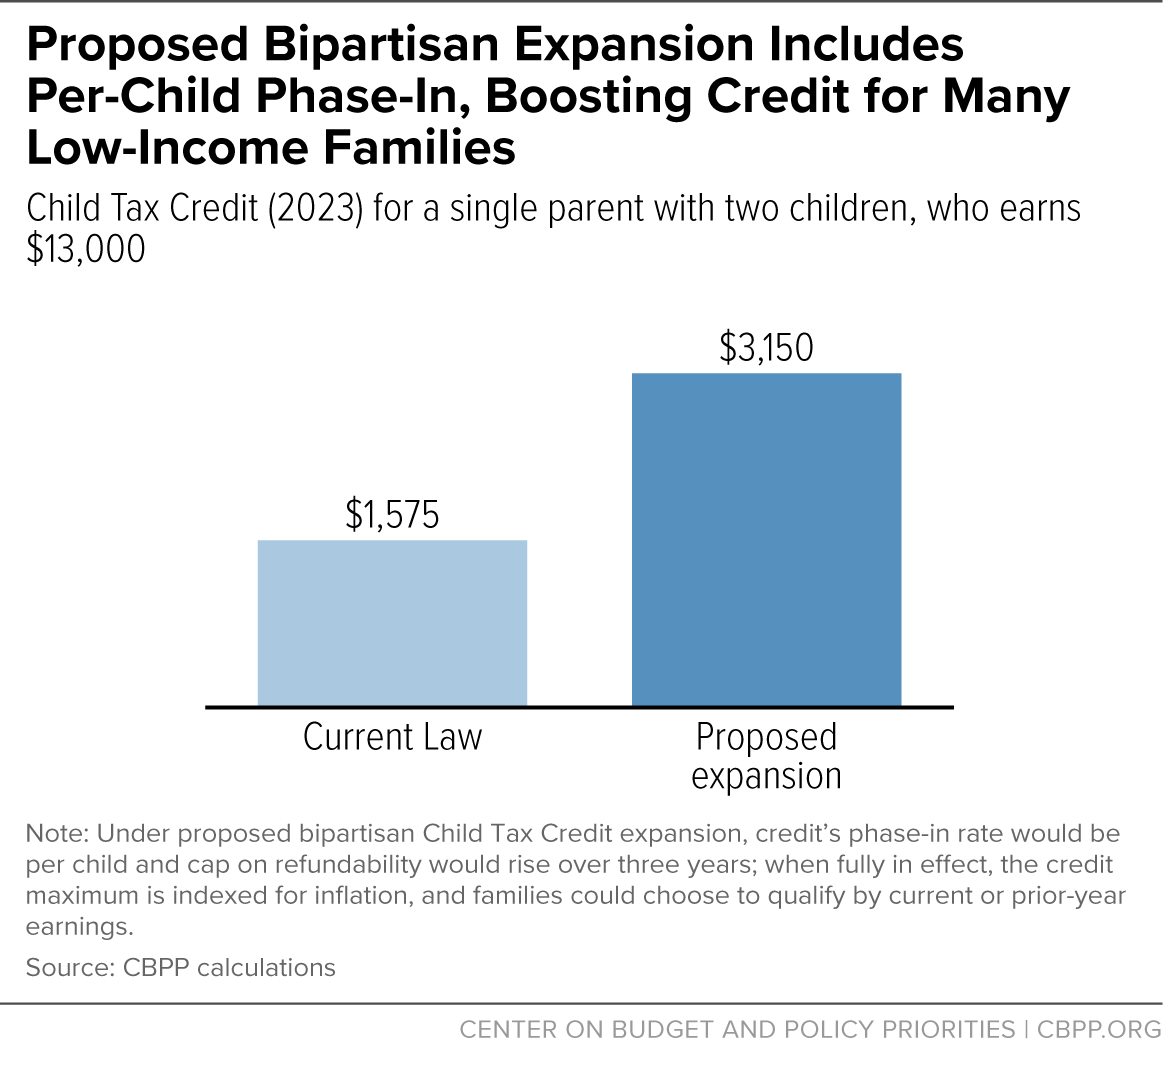 Proposed Bipartisan Expansion Includes Per-Child Phase-In, Boosting Credit for Many Low-Income Families